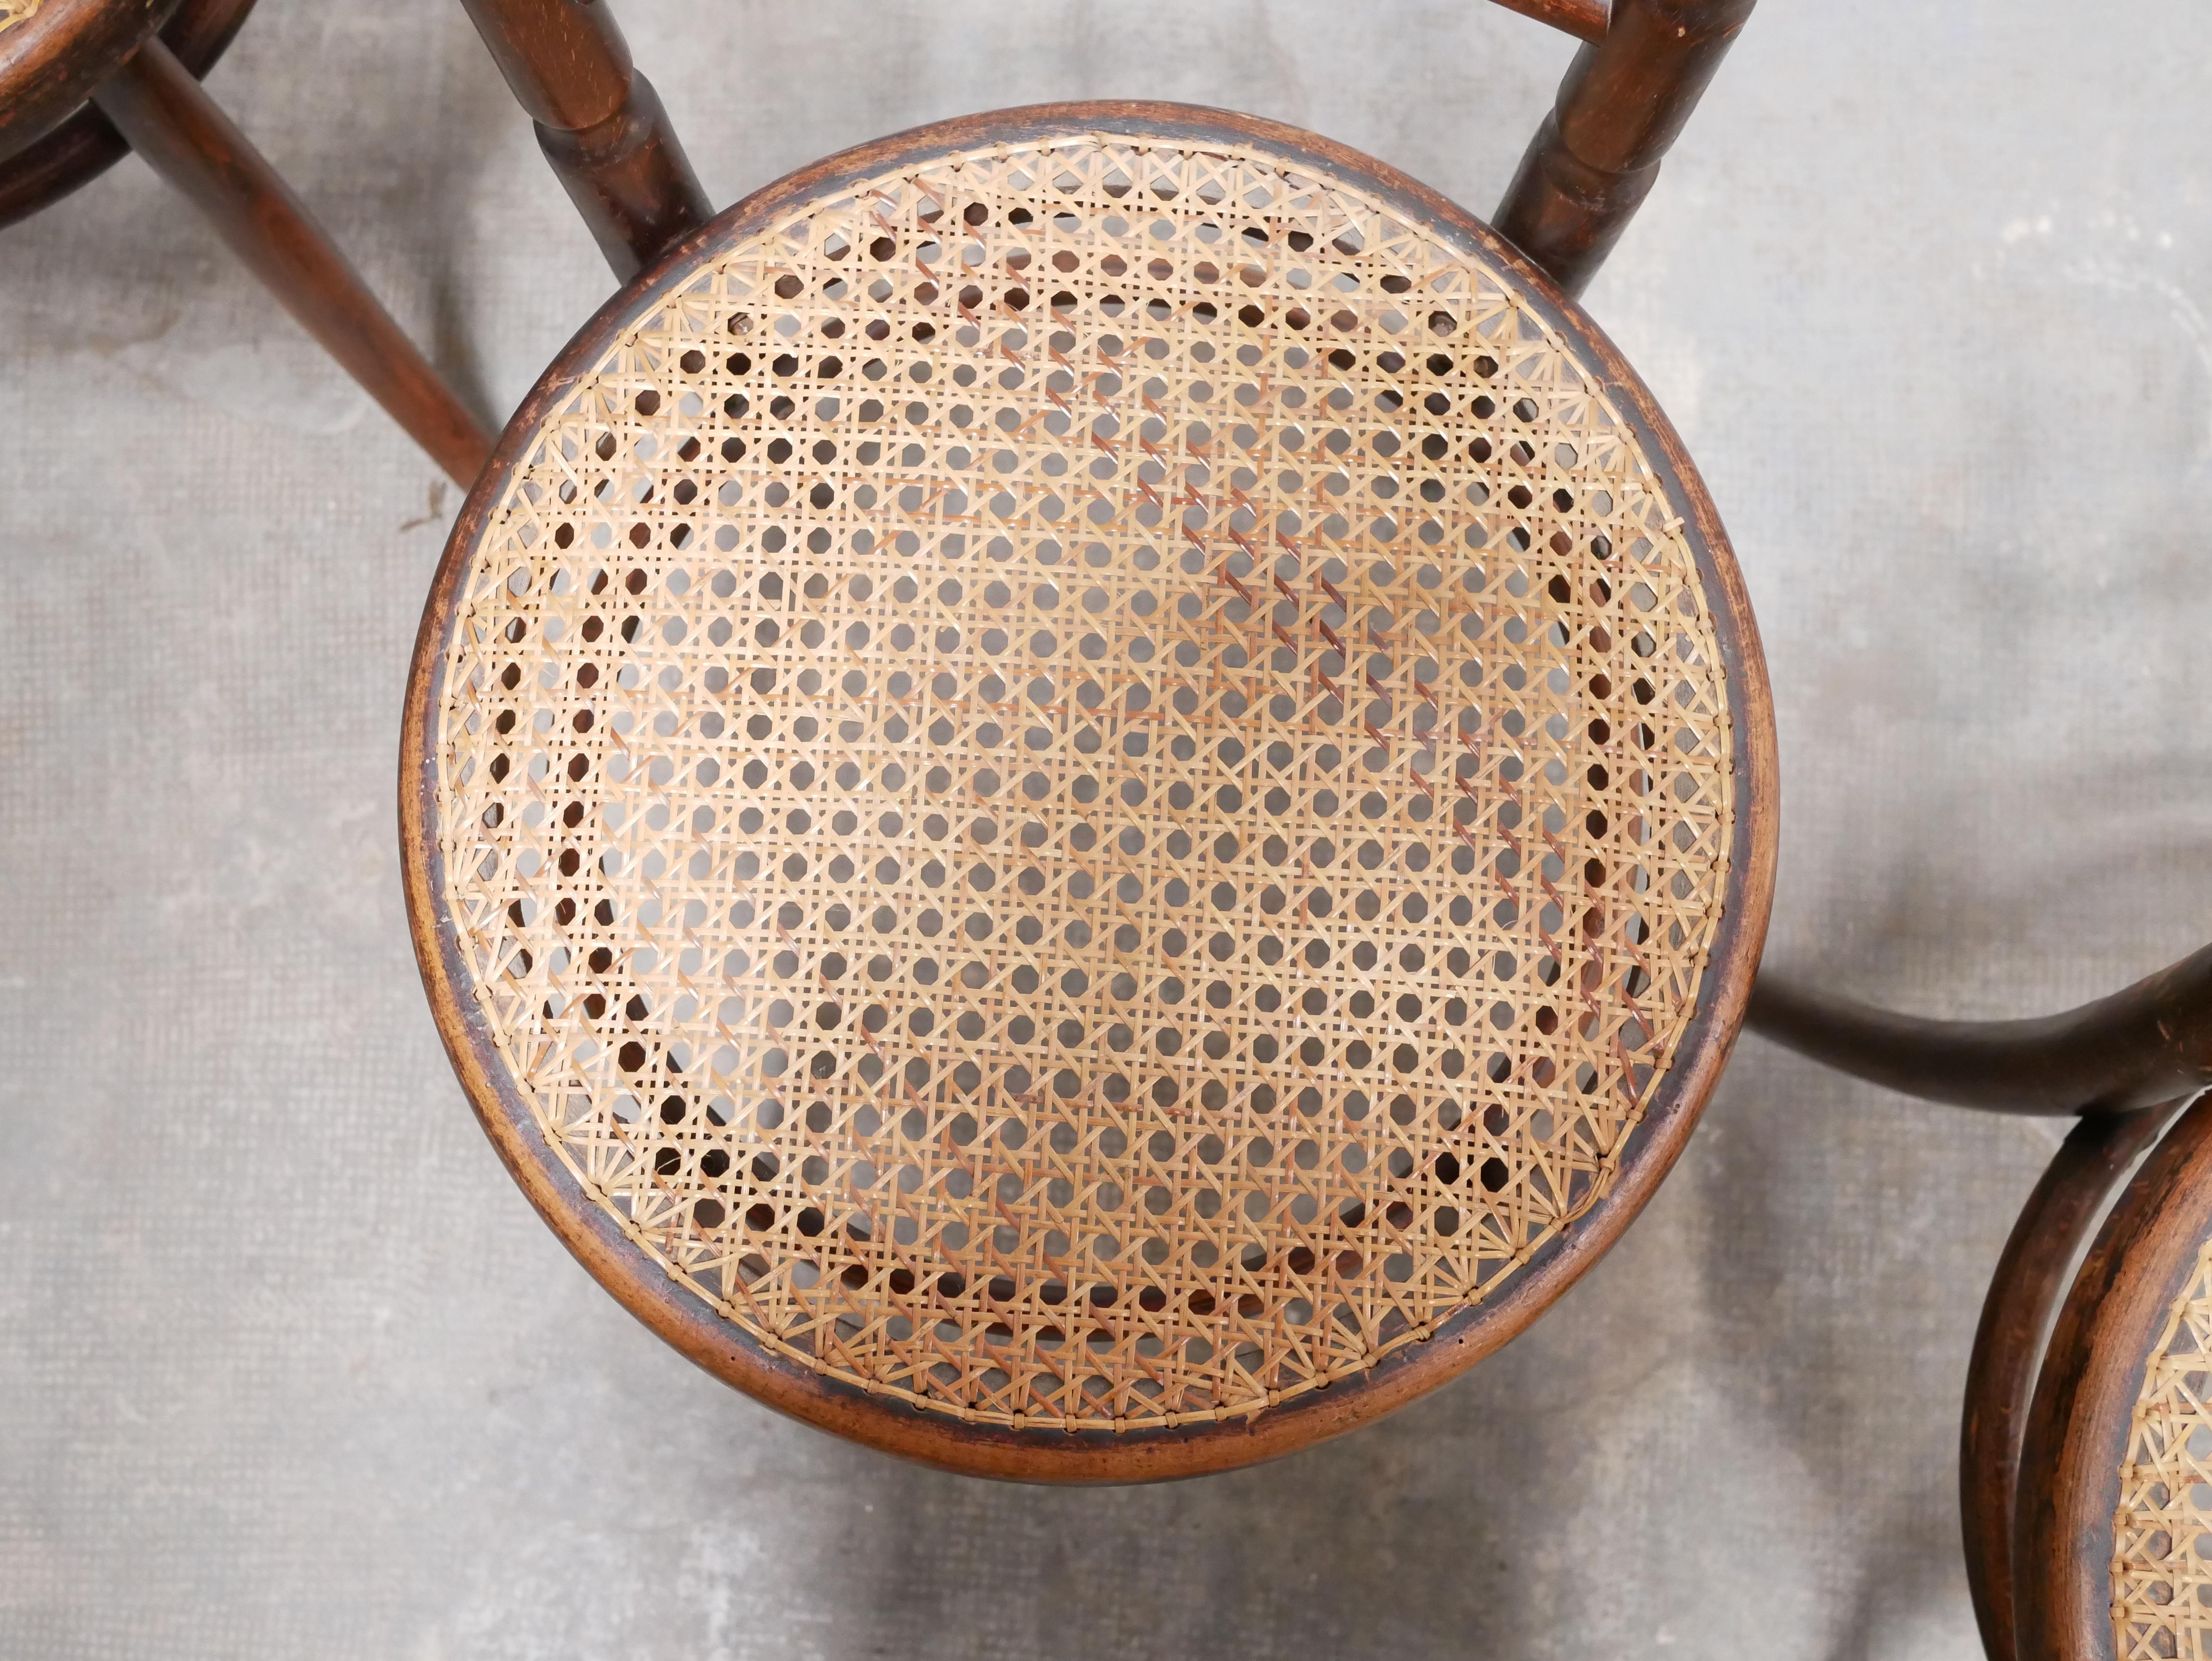 Rattan Old Cane Bistro Chair in Wood by Fischel Editions